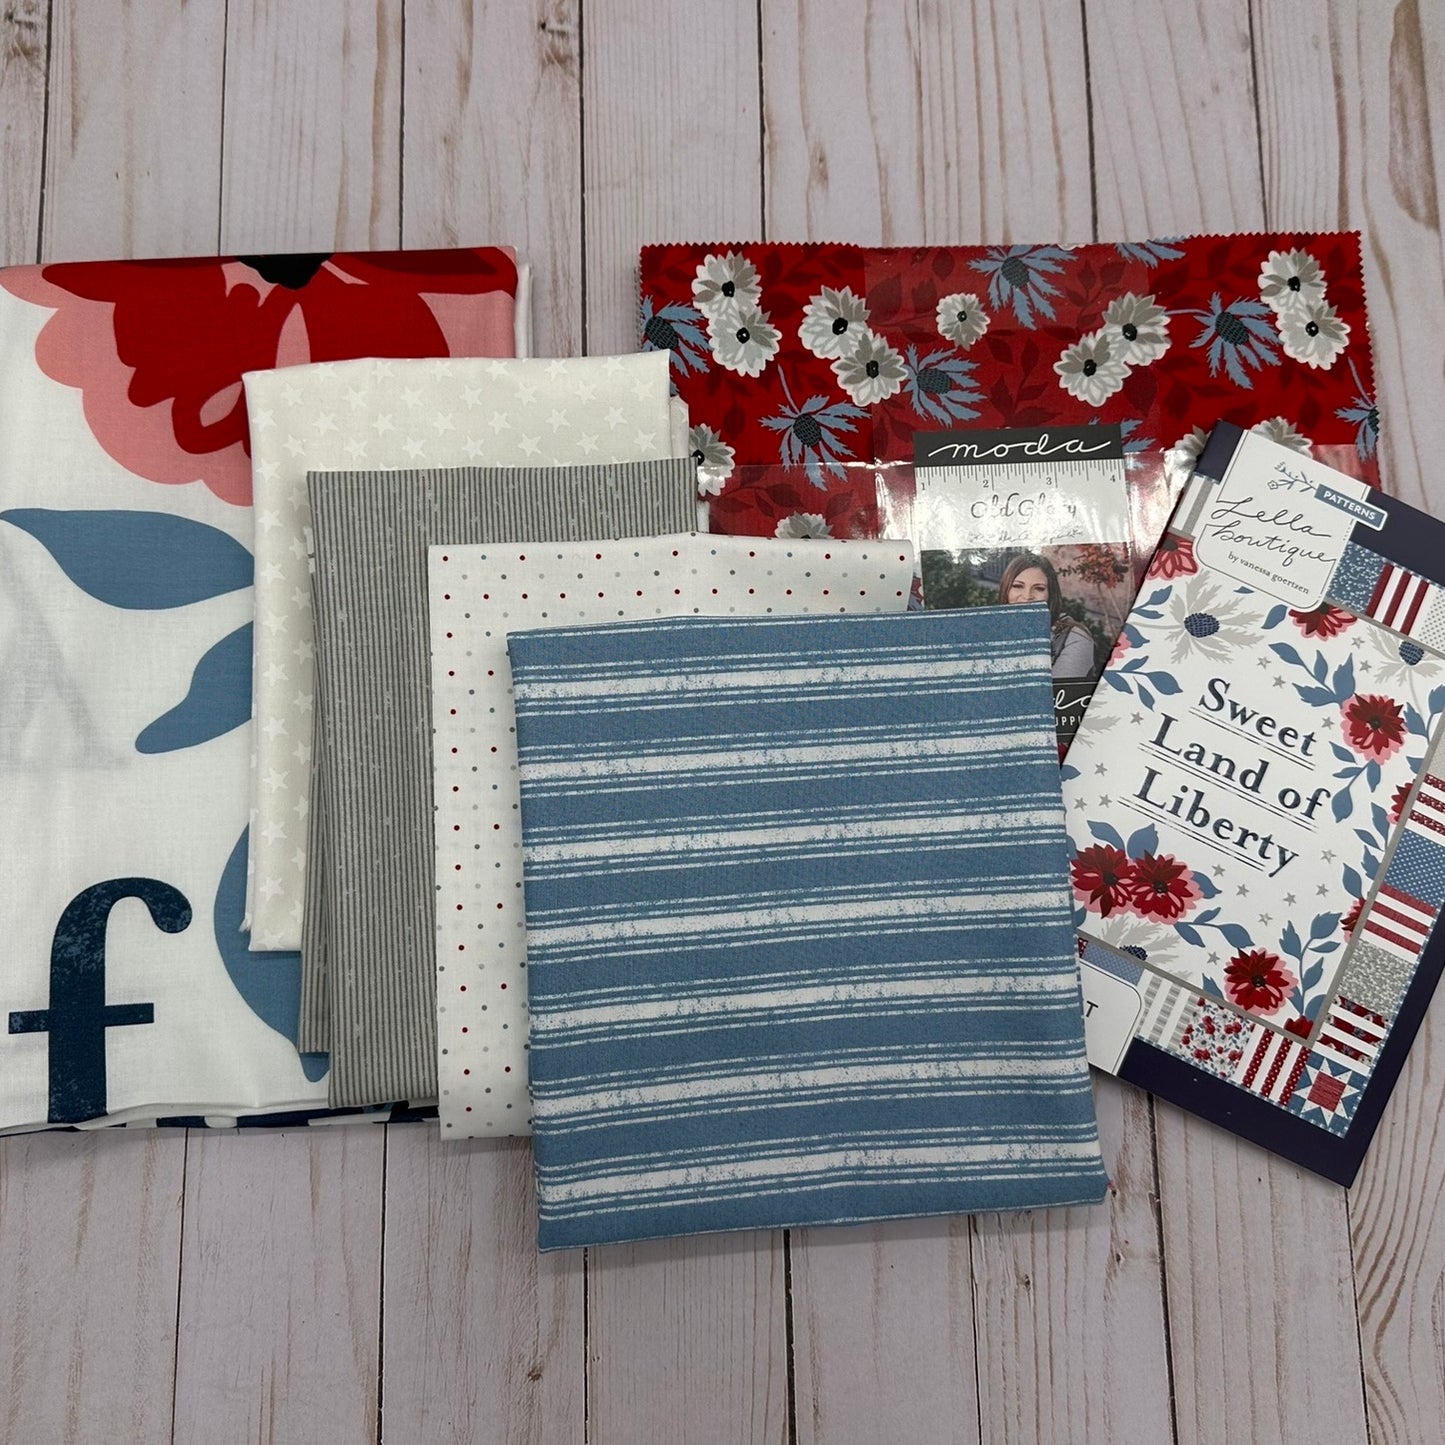 Sweet Land Panel Kit Featuring Old Glory by Lella Boutique